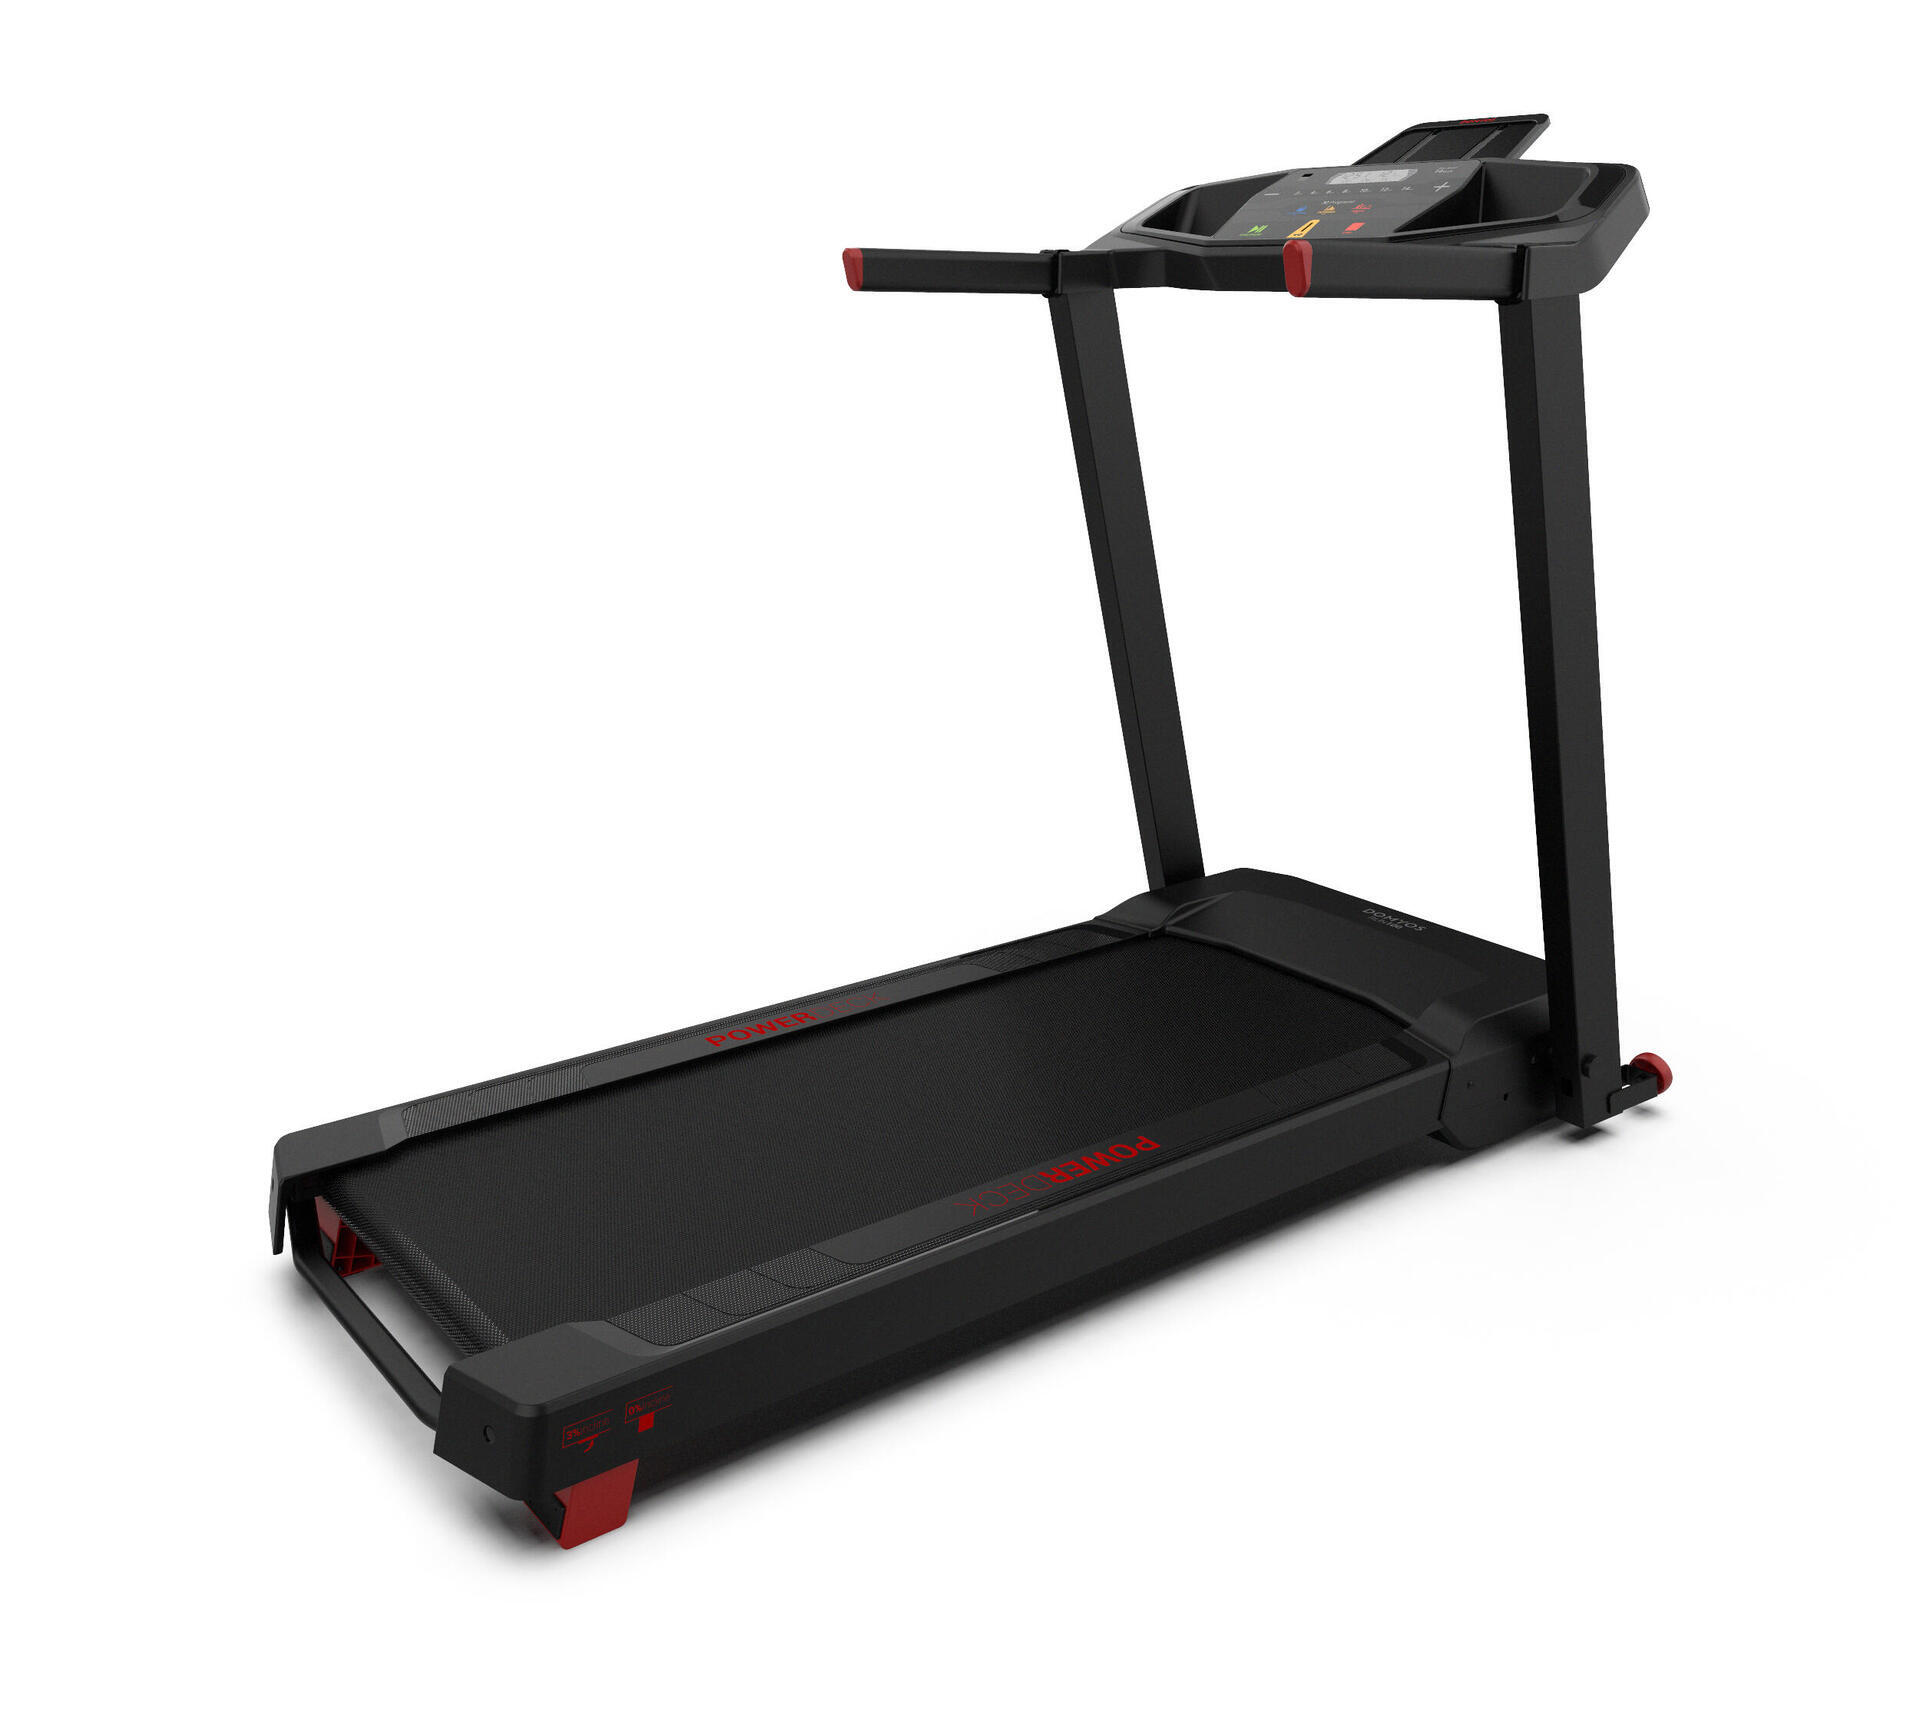 High performance treadmill with compact design and wide running surface